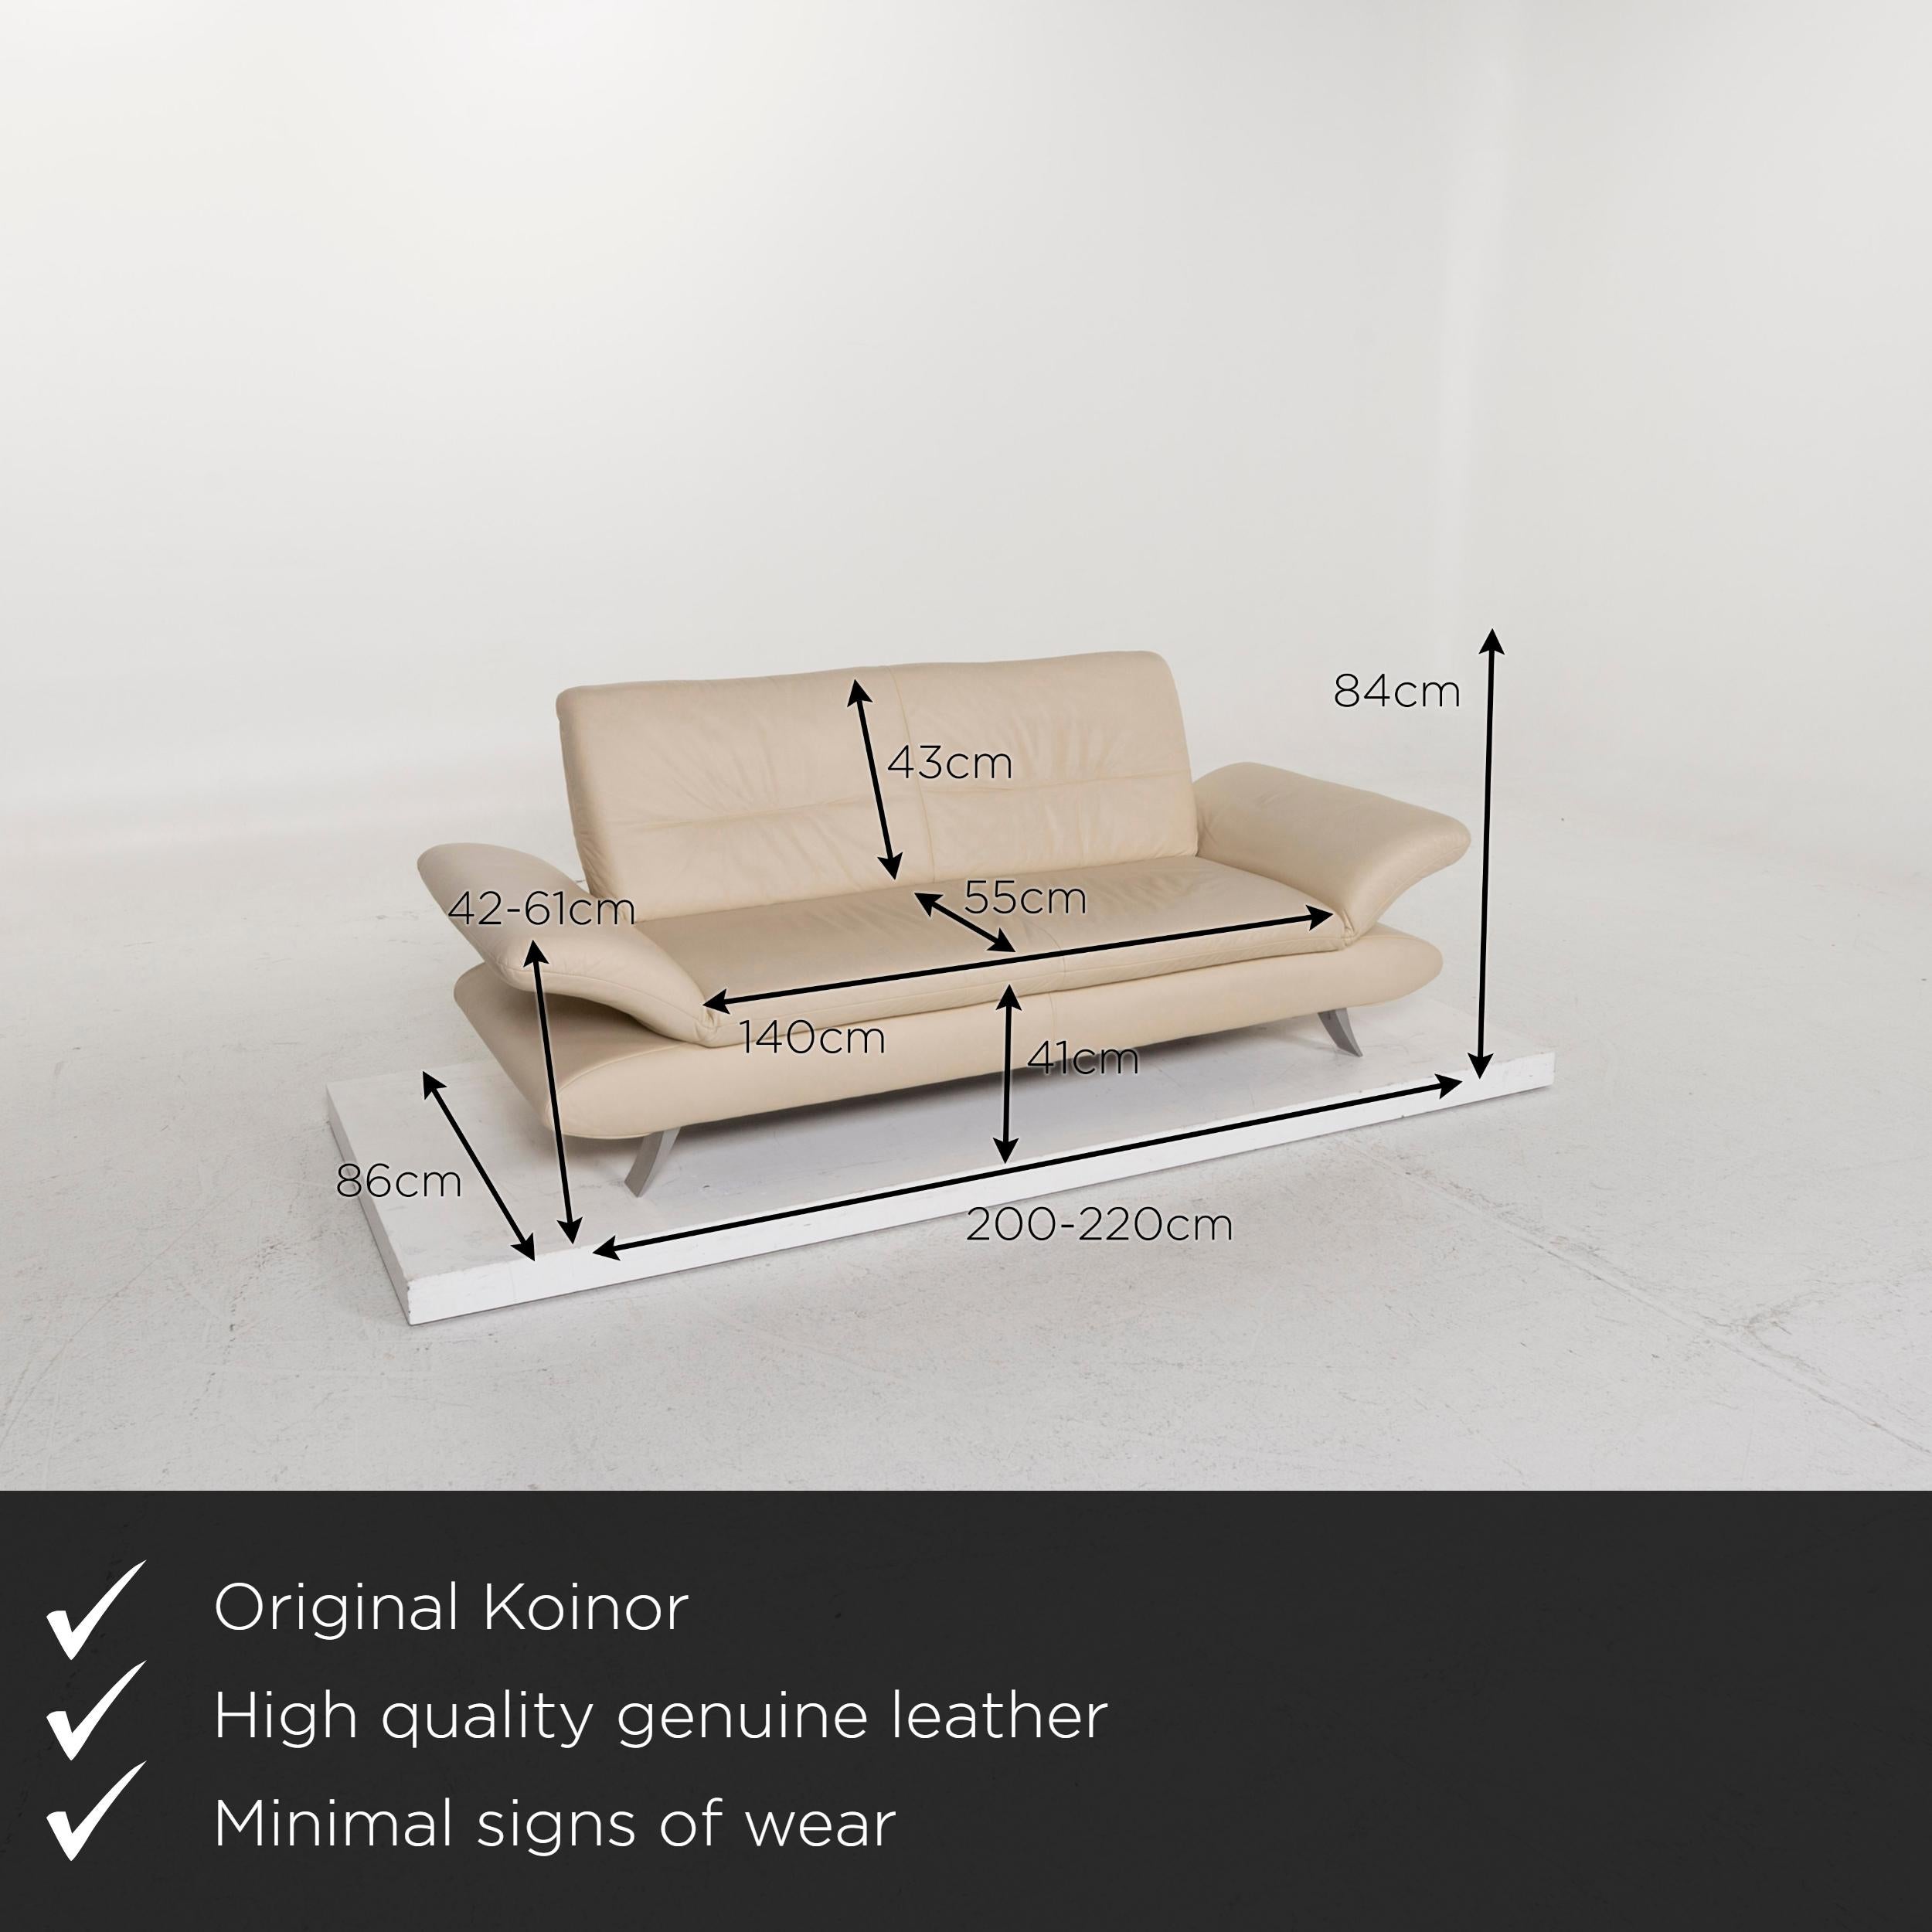 We present to you a Koinor Rossini leather sofa beige two-seat.
 
 

 Product measurements in centimeters:
 

Depth 86
Width 220
Height 84
Seat height 41
Rest height 42
Seat depth 55
Seat width 140
Back height 43.
   